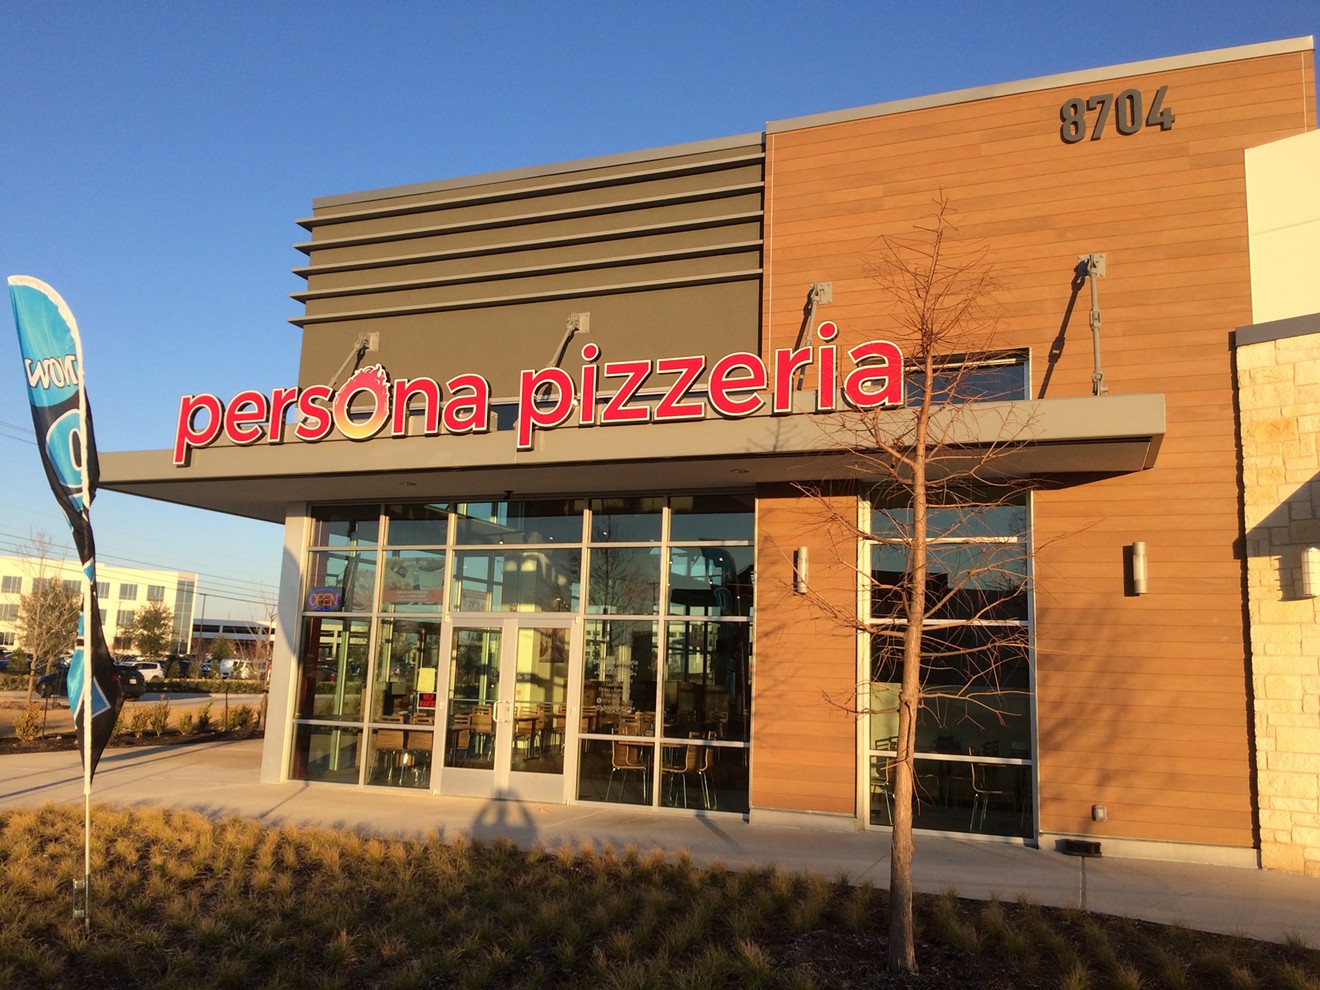 Persona Pizzeria's is DFW's newest player in the wood-fired Neapolitan pizza game.